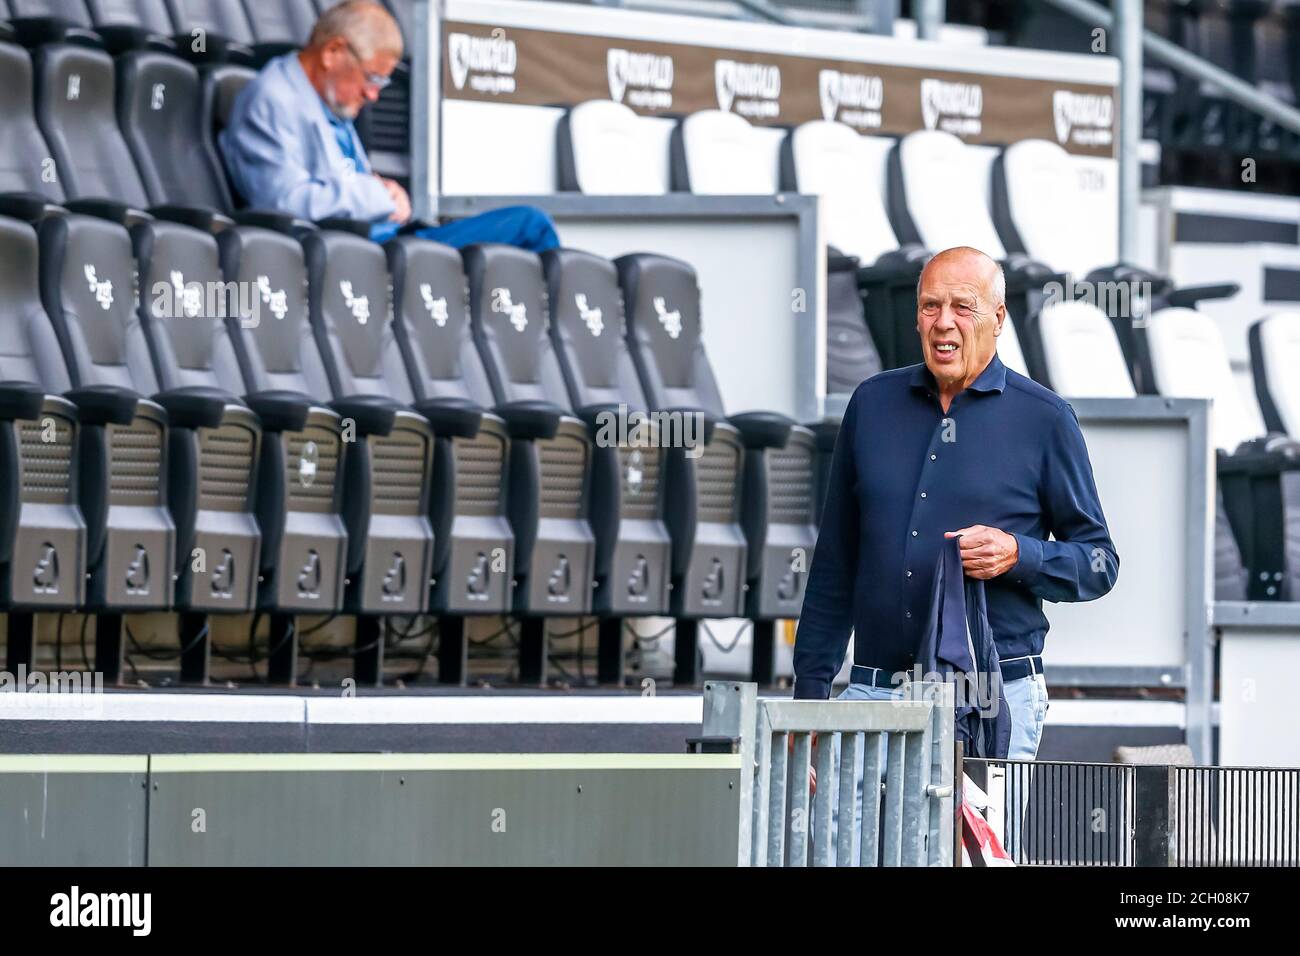 ALMELO, Erve Asito, 13-09-2020, season 2020/2021, Dutch Eredivisie. Heracles man Jan Smit during the match Heracles - ADO Credit: Pro Shots/Alamy Live News Stock Photo